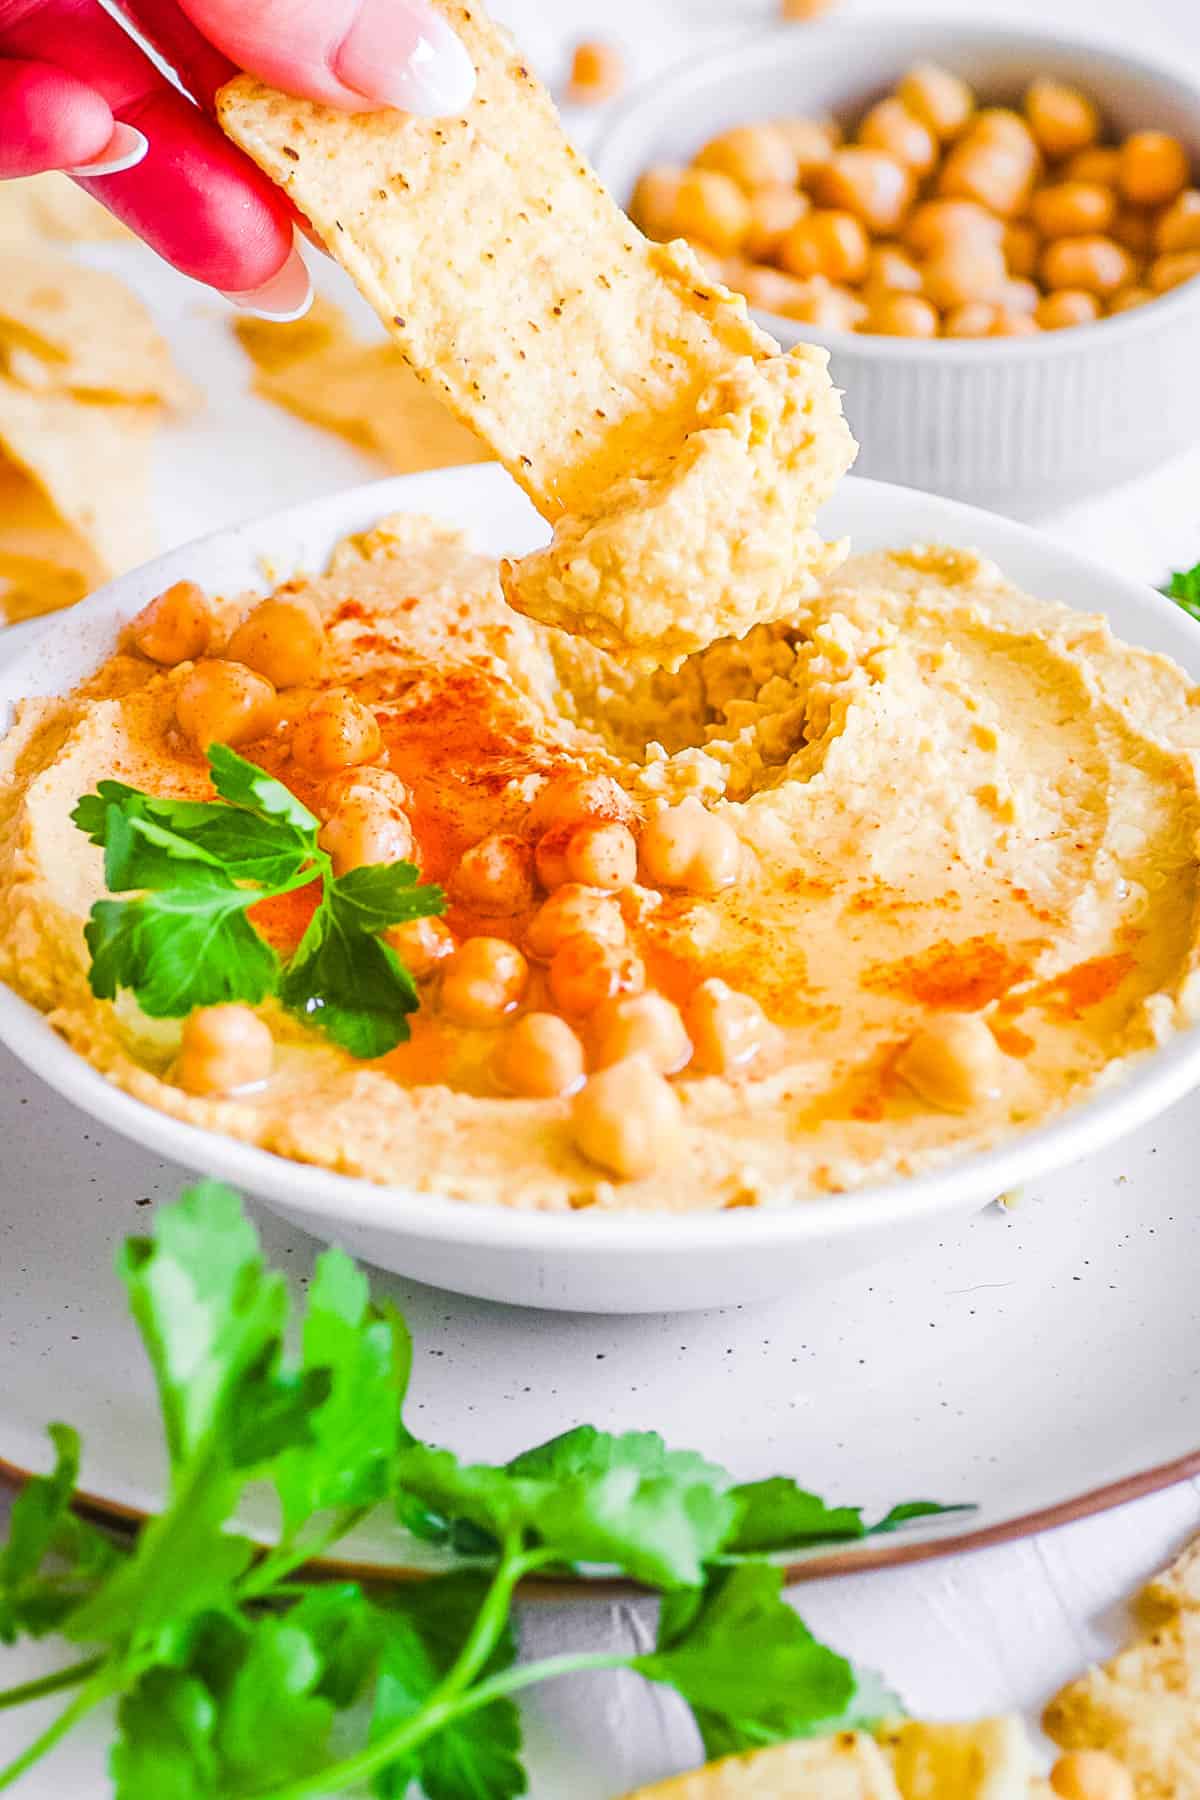 Hummus without garlic in a white bowl garnished with parsley and paprika, with a pita chip dipped in it.